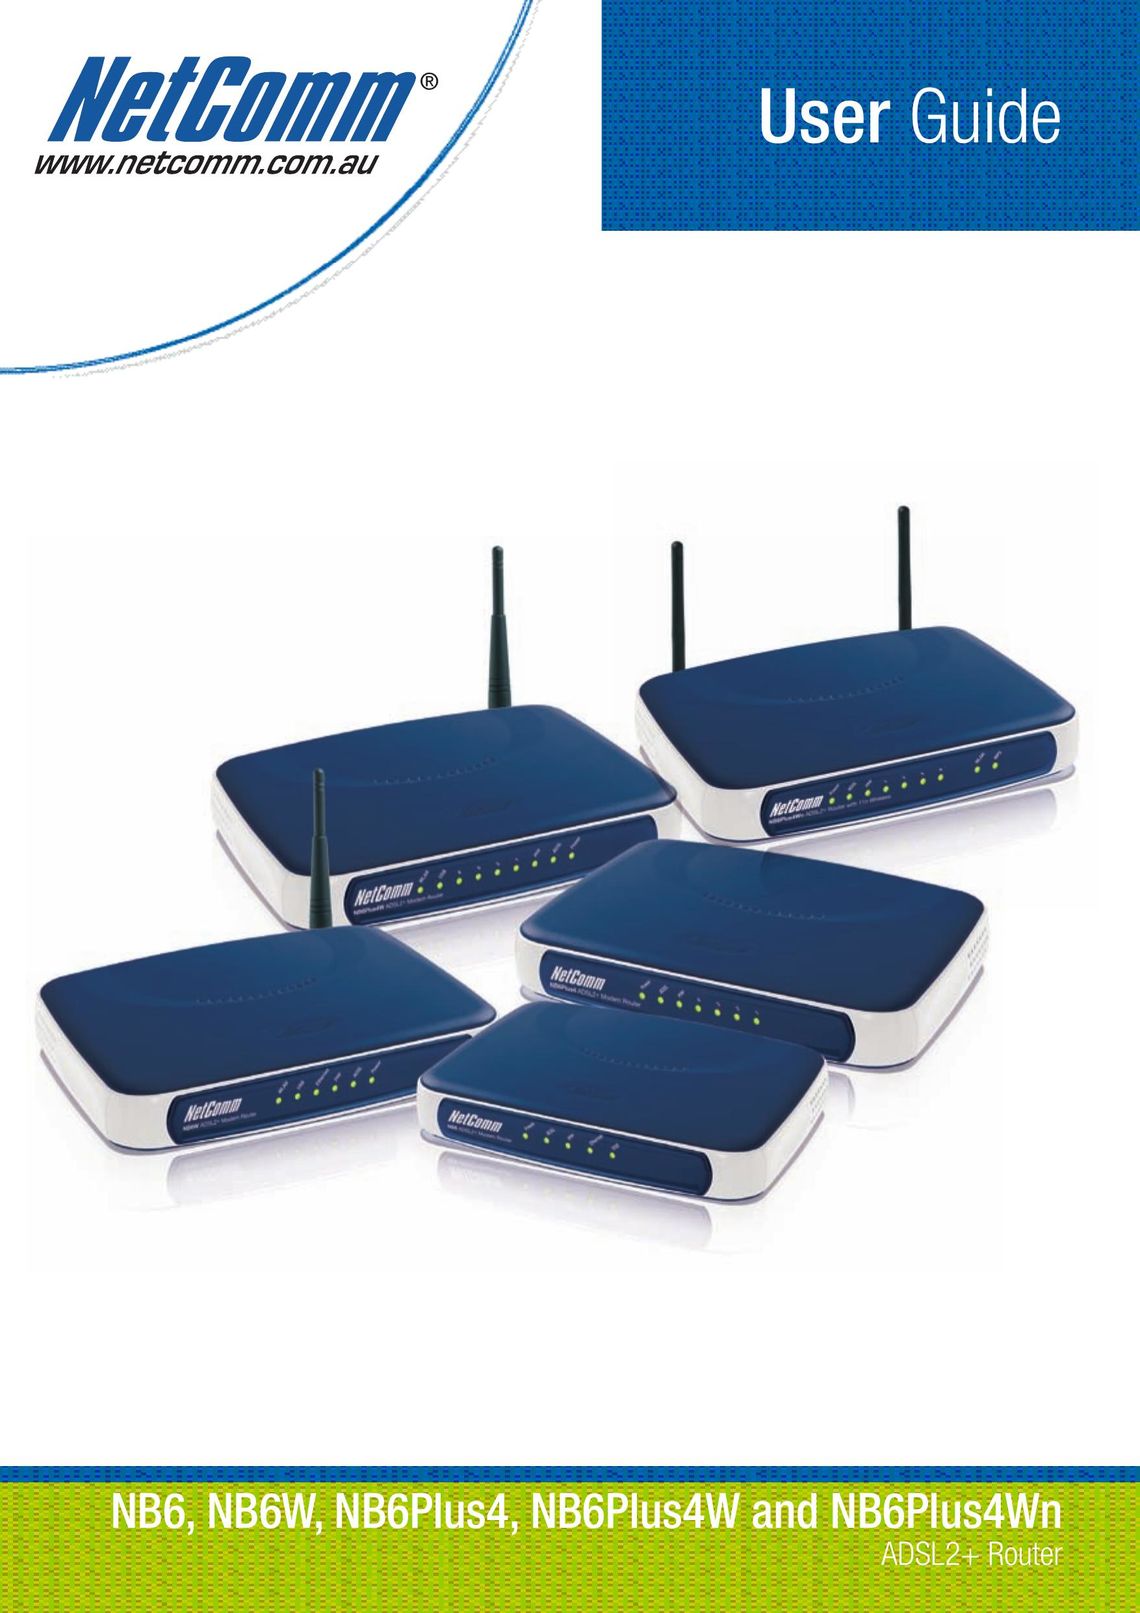 NetComm NB6PLUS4W Network Router User Manual